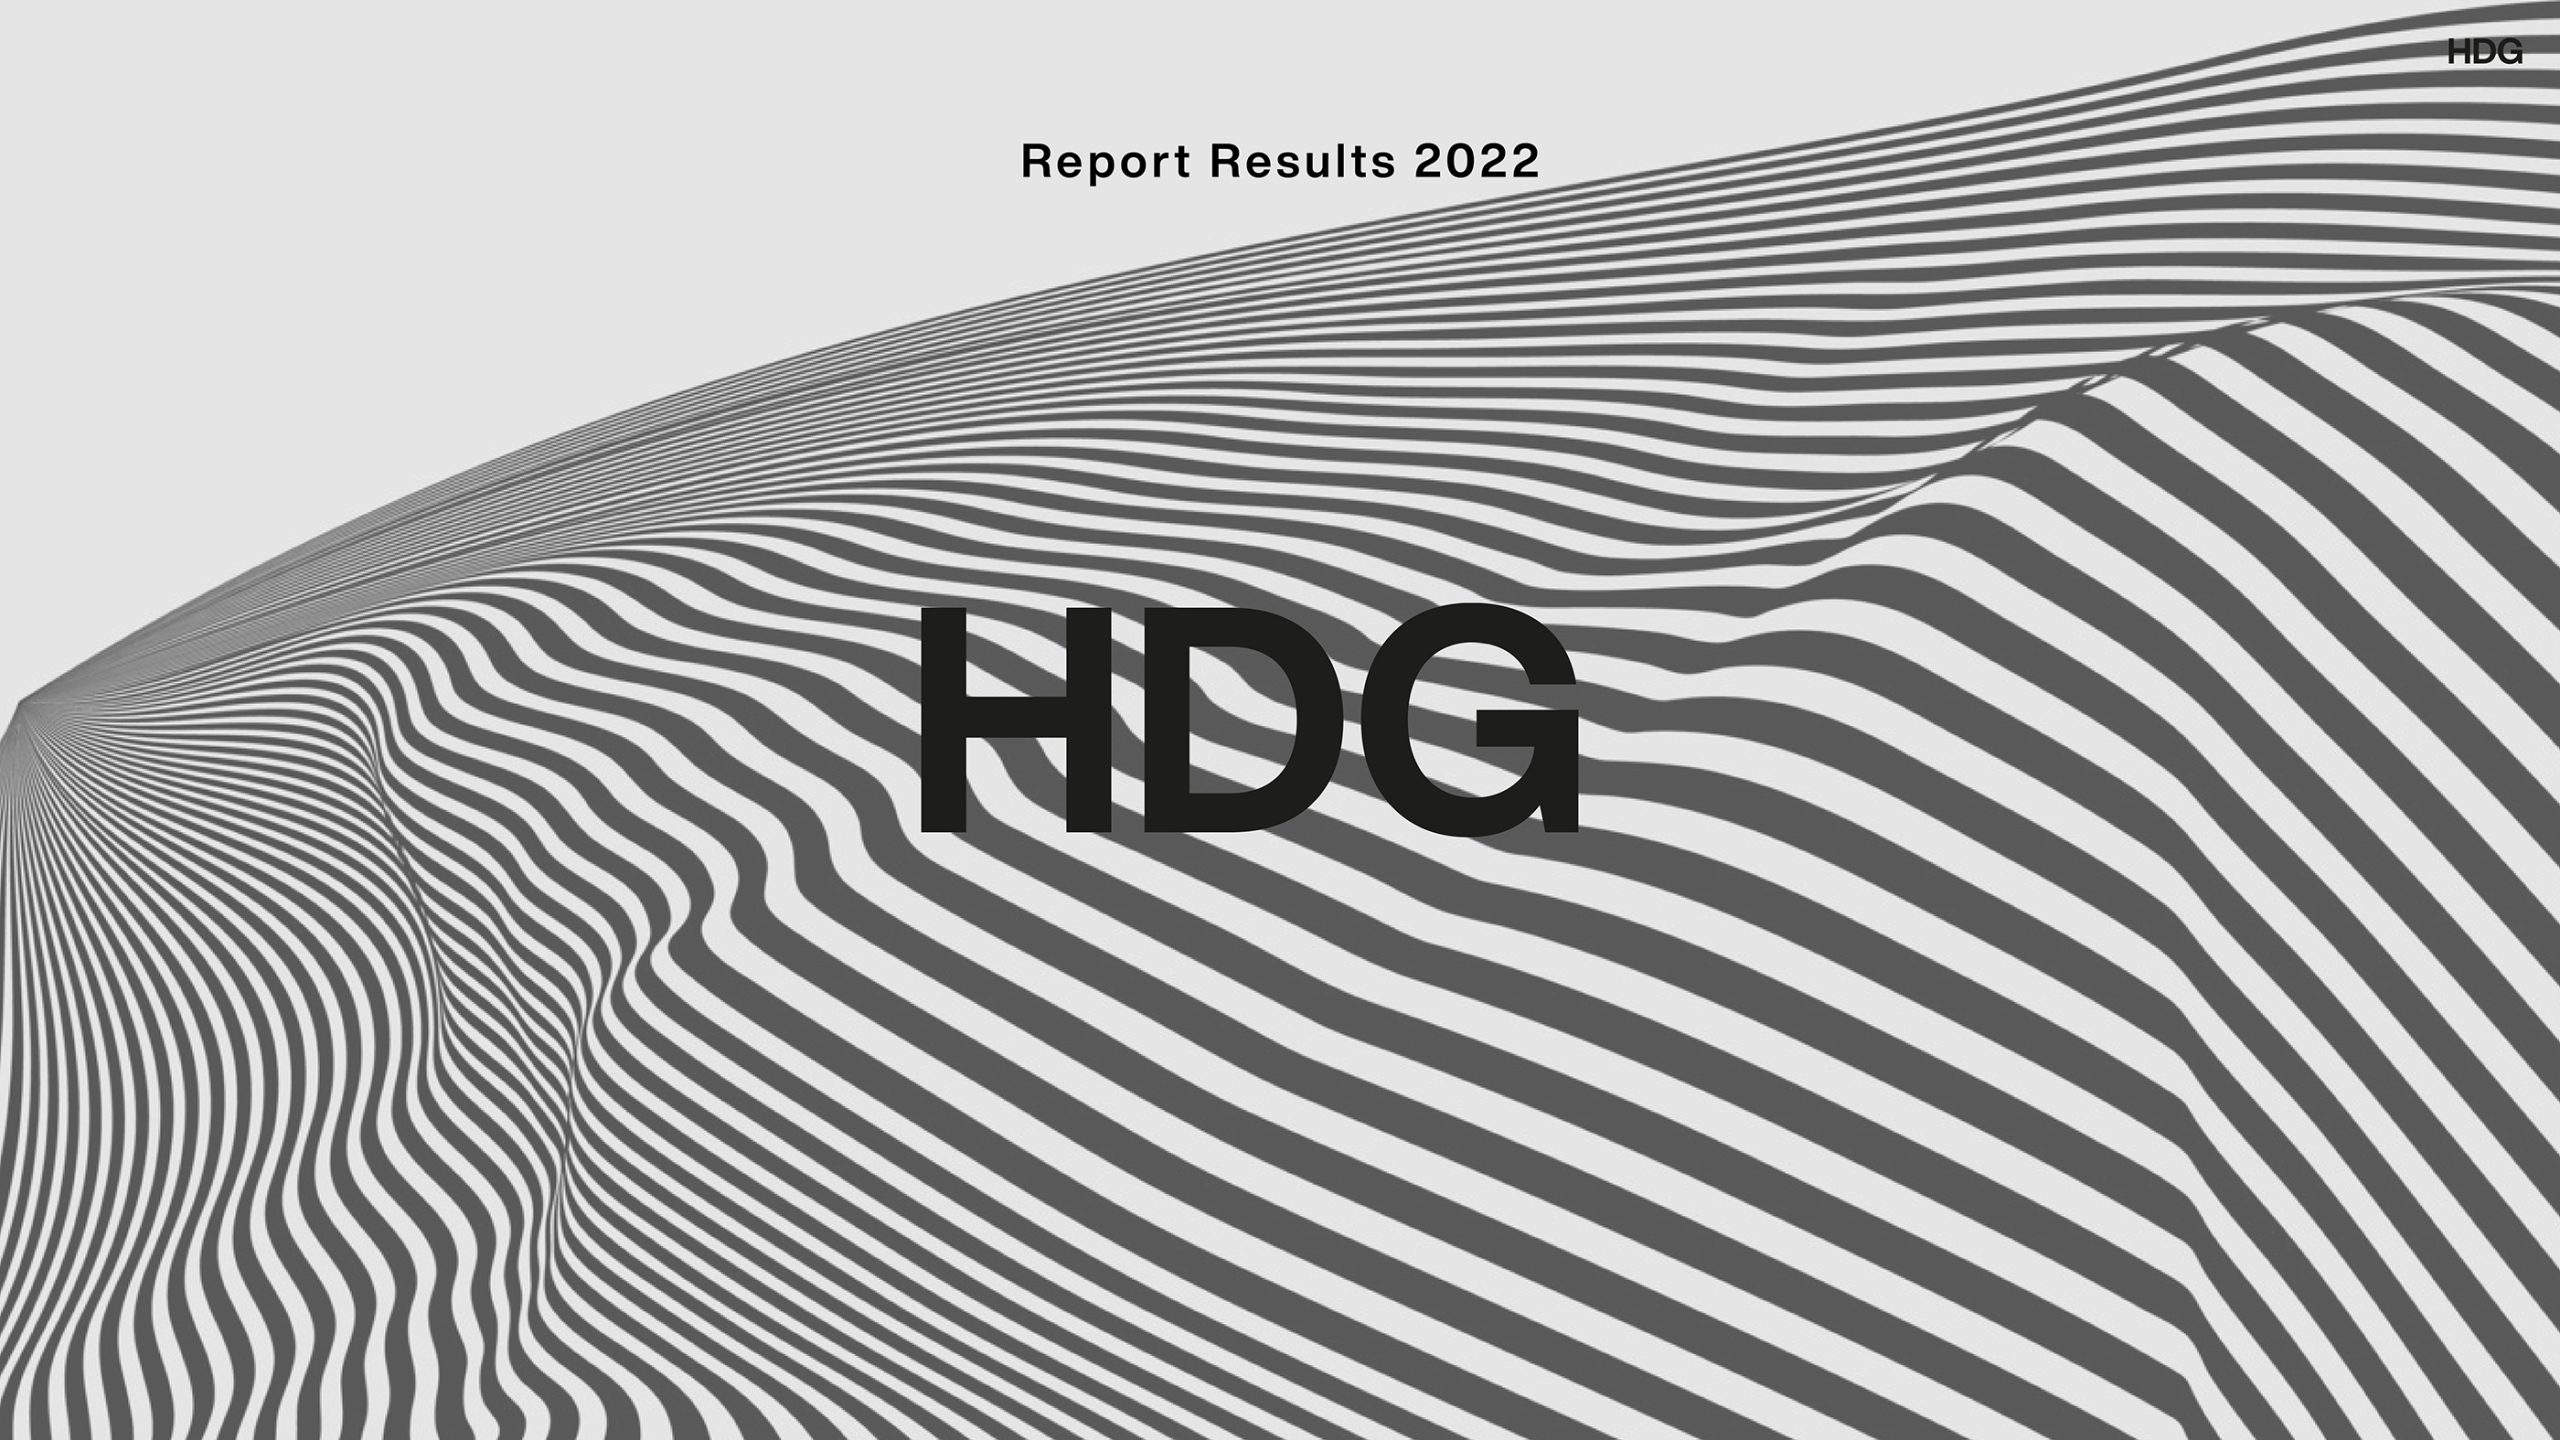 The new Annual Report is online - By HDG